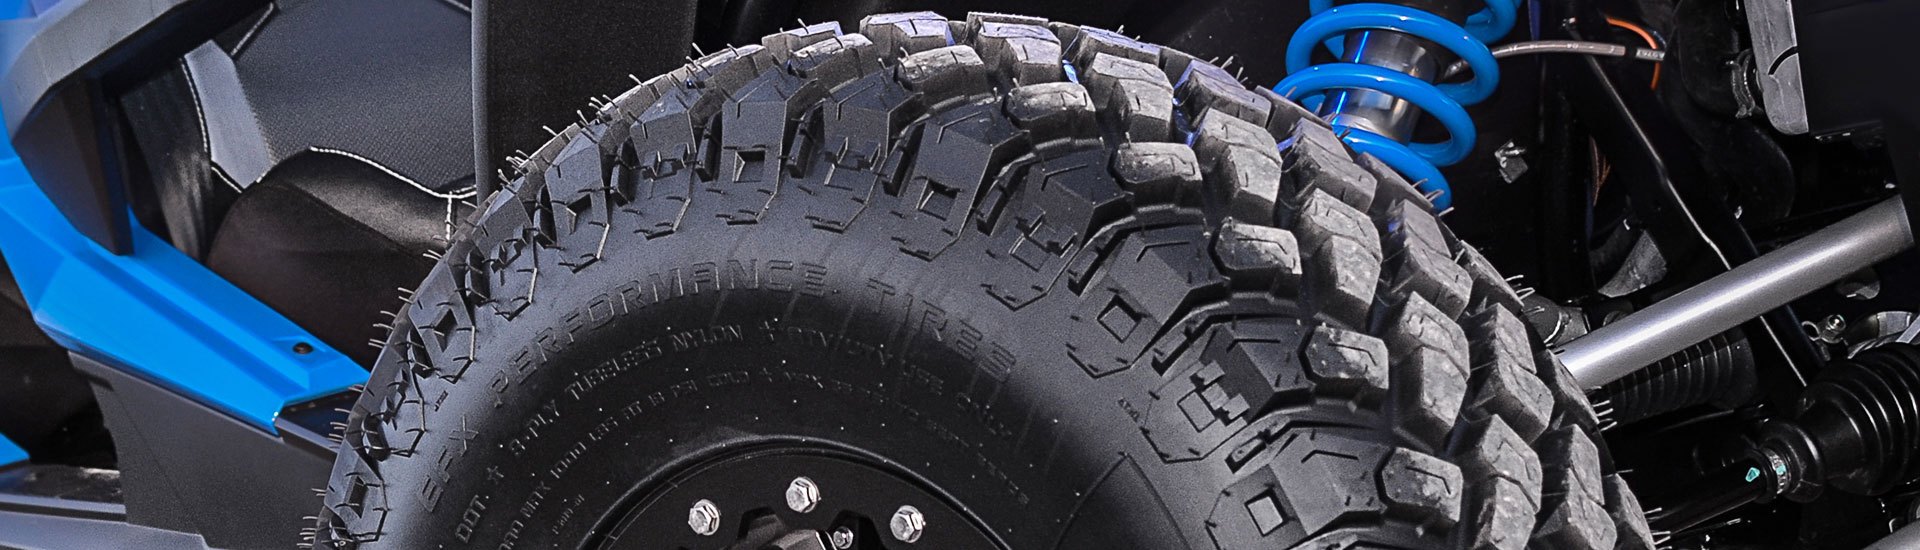 Universal Powersports Motorcycle Tires